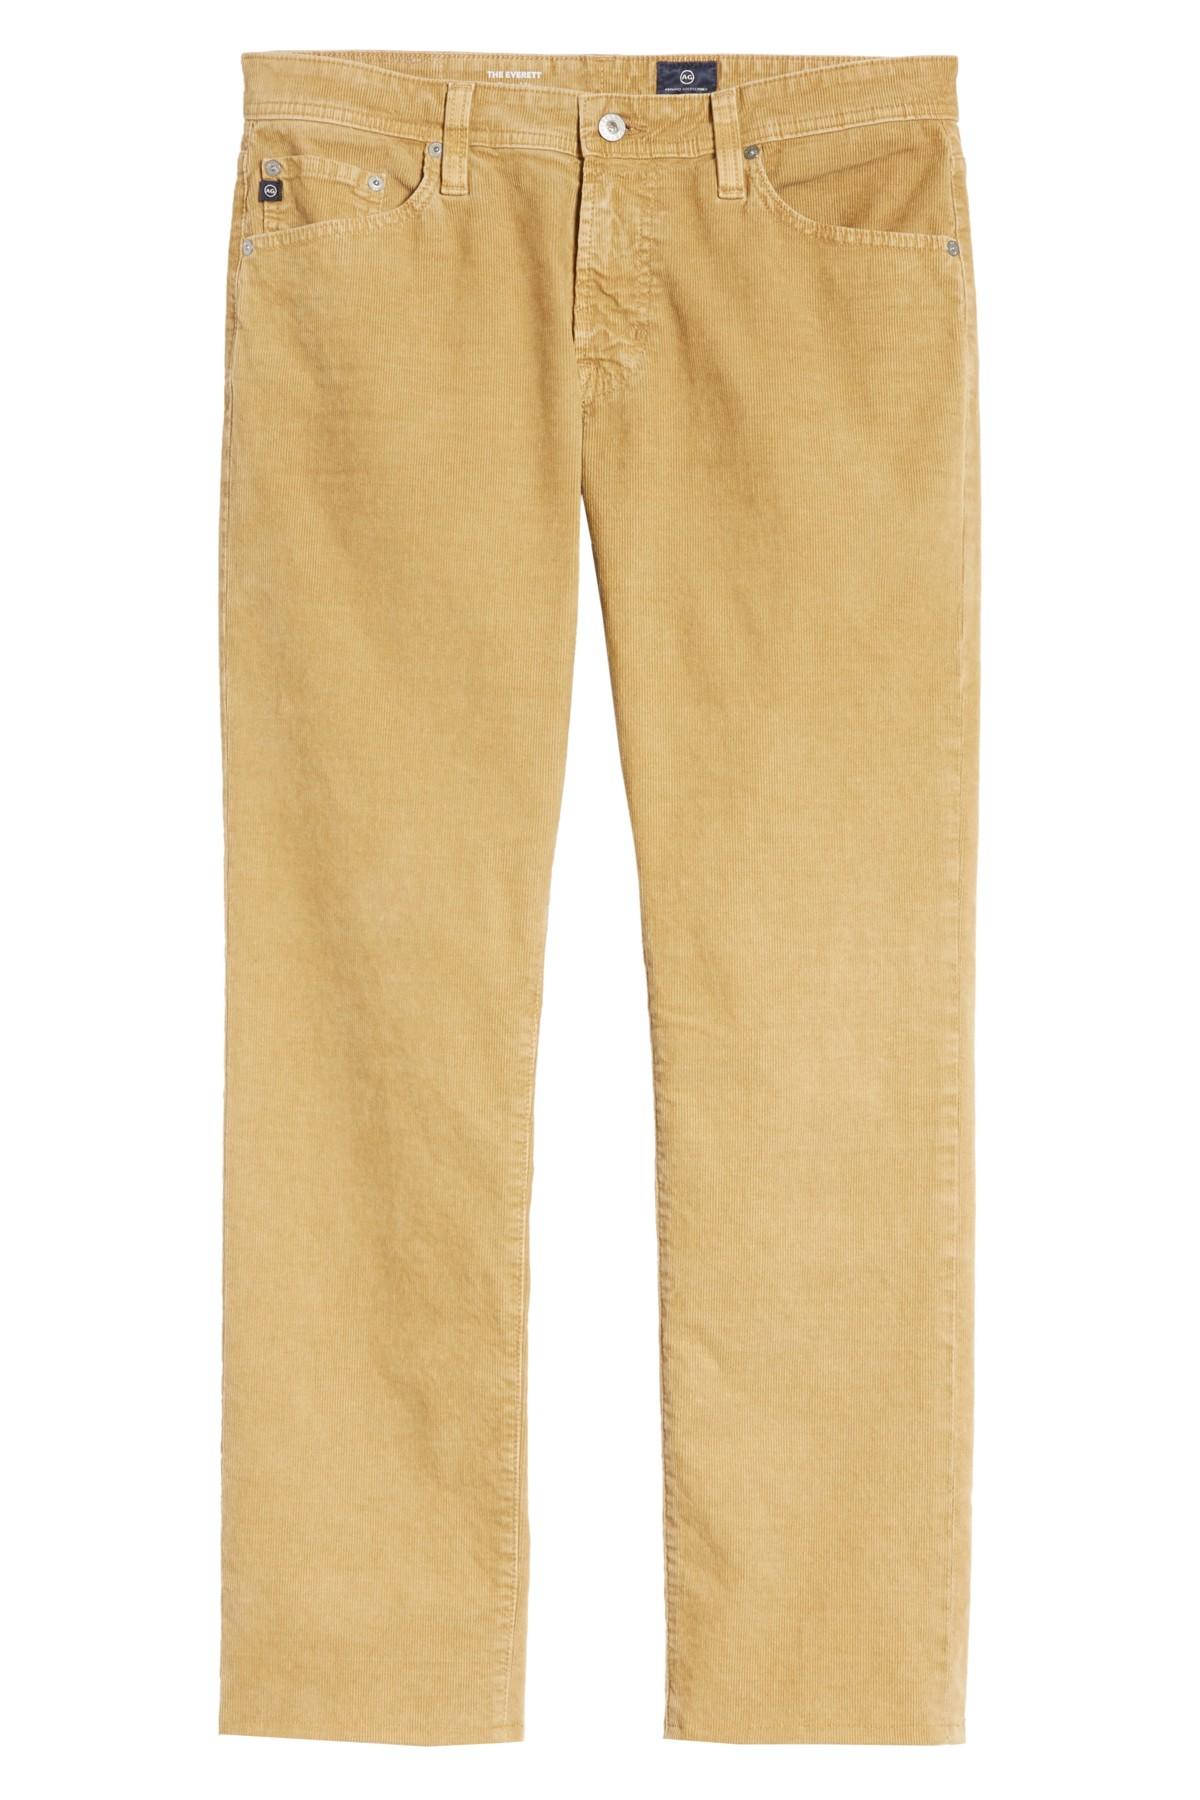 AG Jeans Graduate Tailored Straight Corduroy Pants in Natural for Men ...